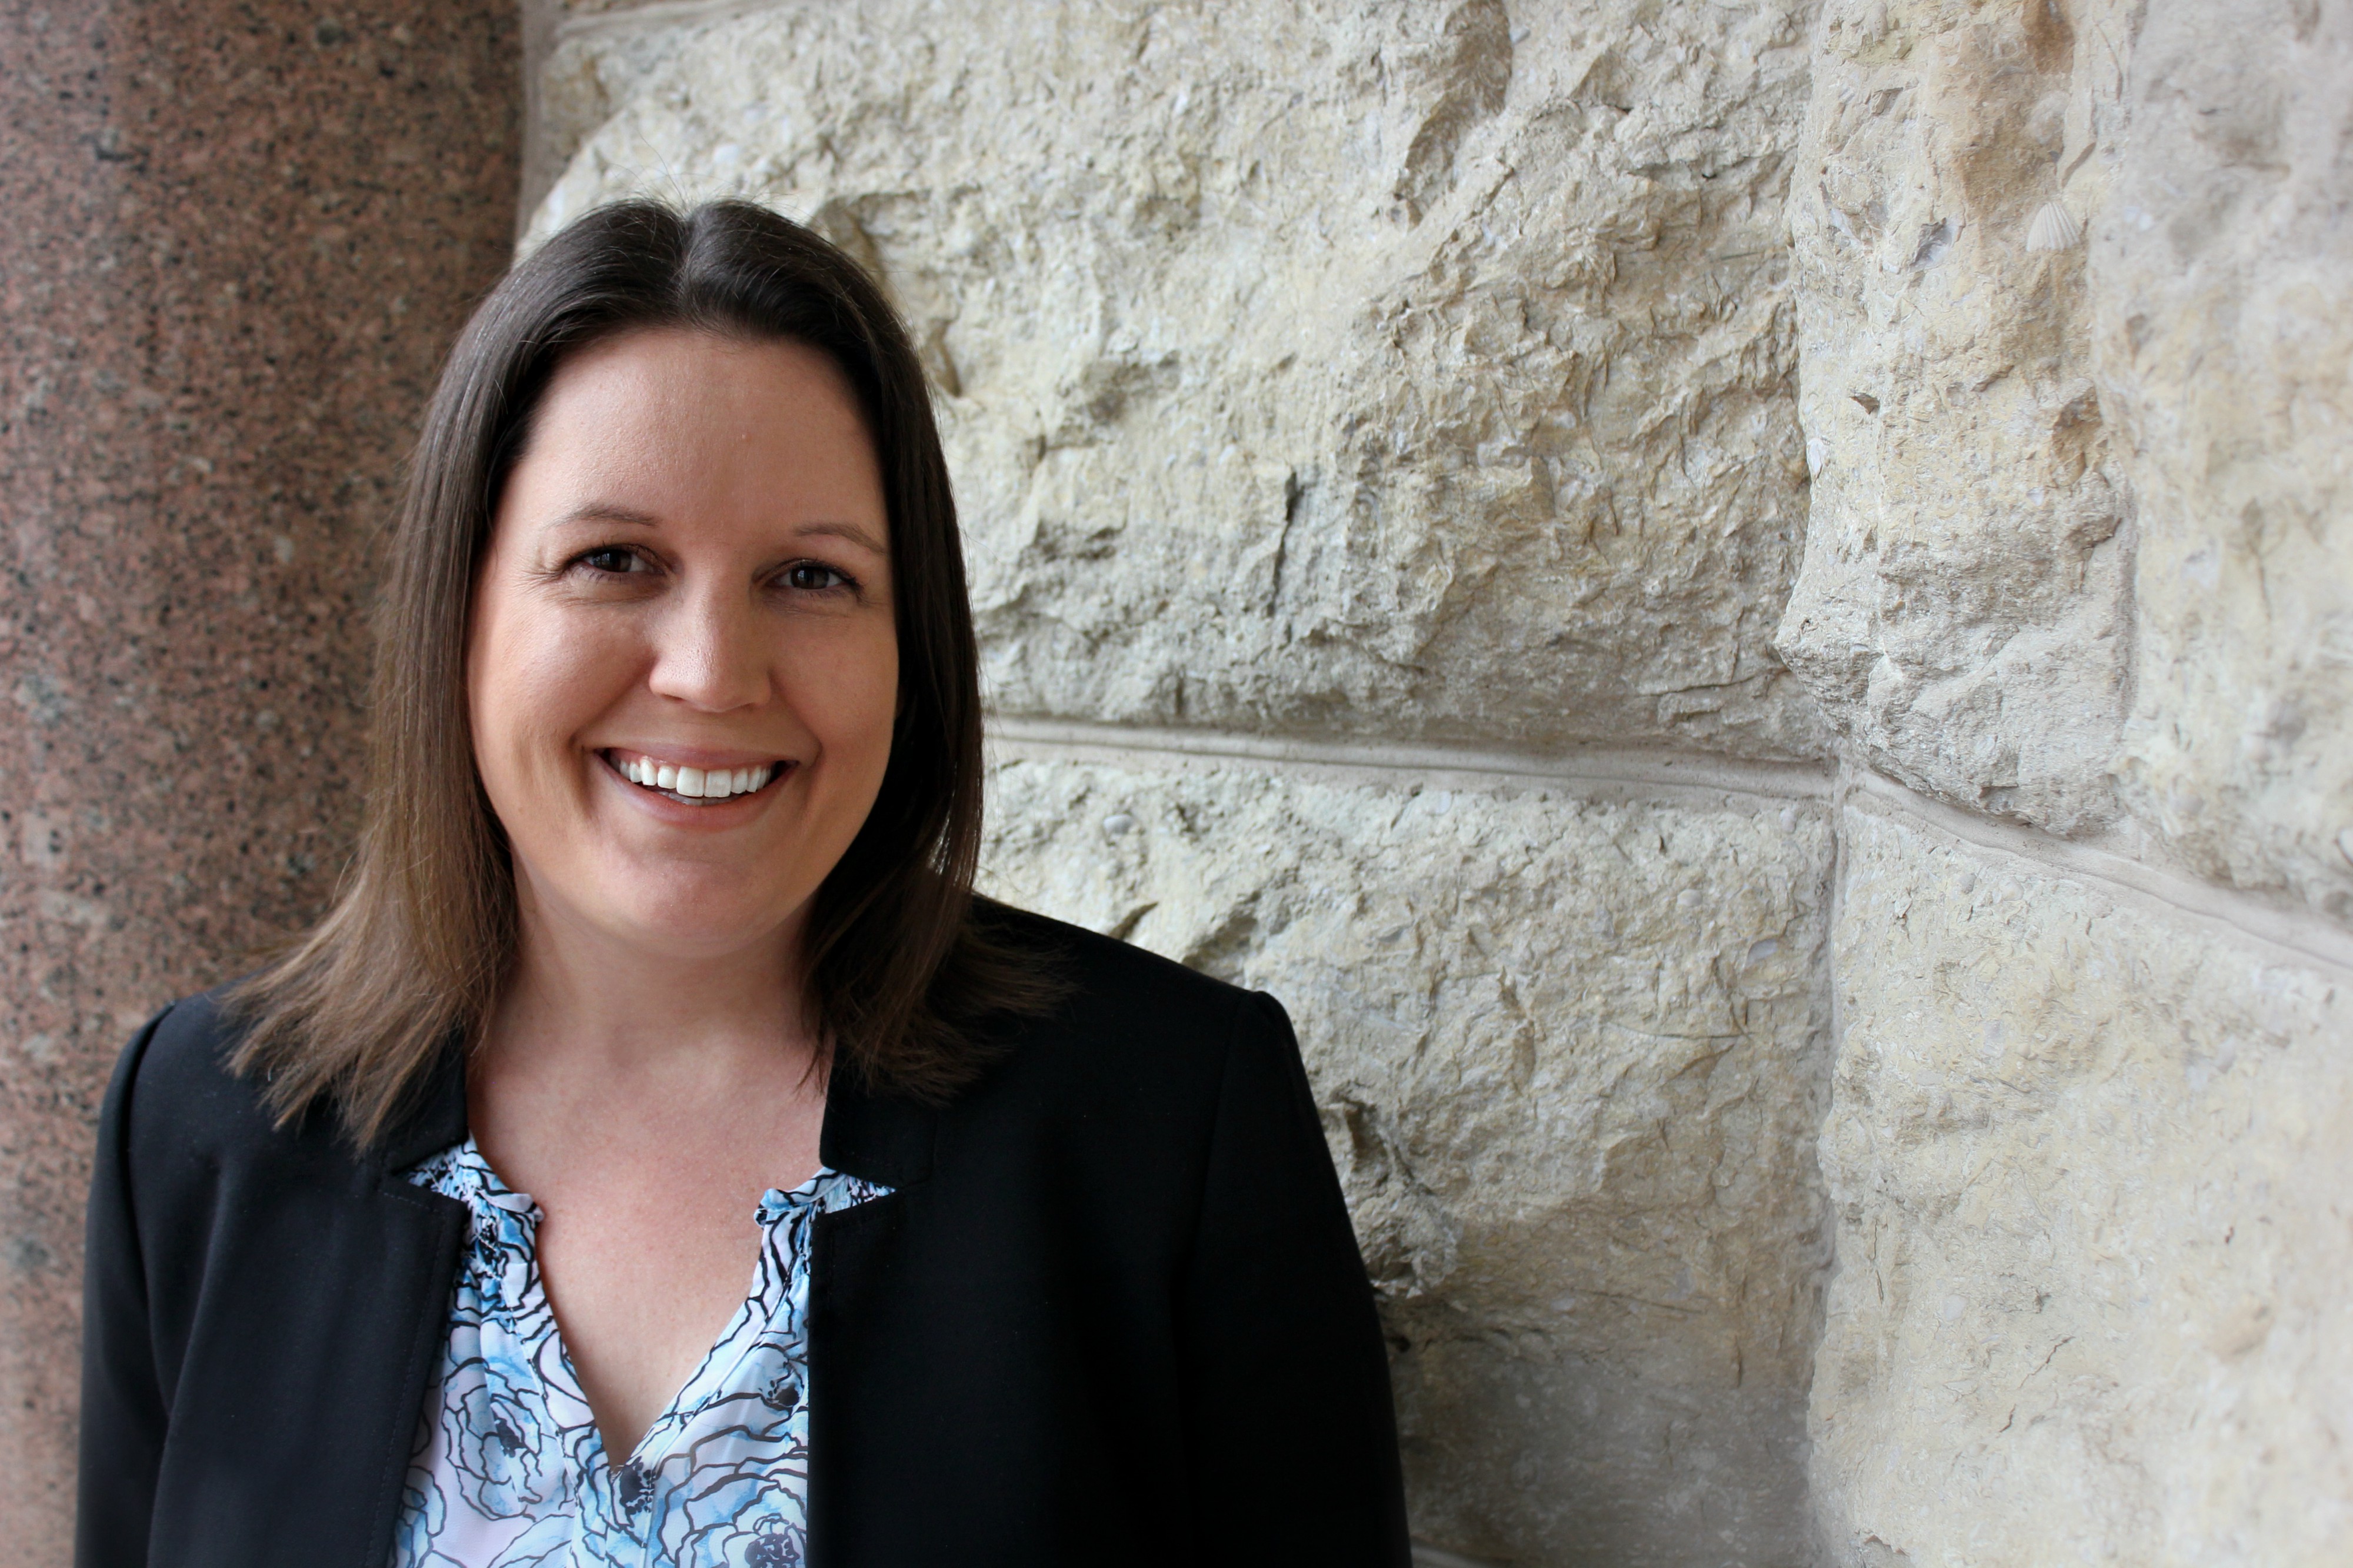 Megan Seymore, a doctoral student in the accounting program, has been awarded the $10,000 Michael J. Barrett Doctoral Dissertation Grant from the Institute of Internal Auditors’ Internal Audit Foundation. 